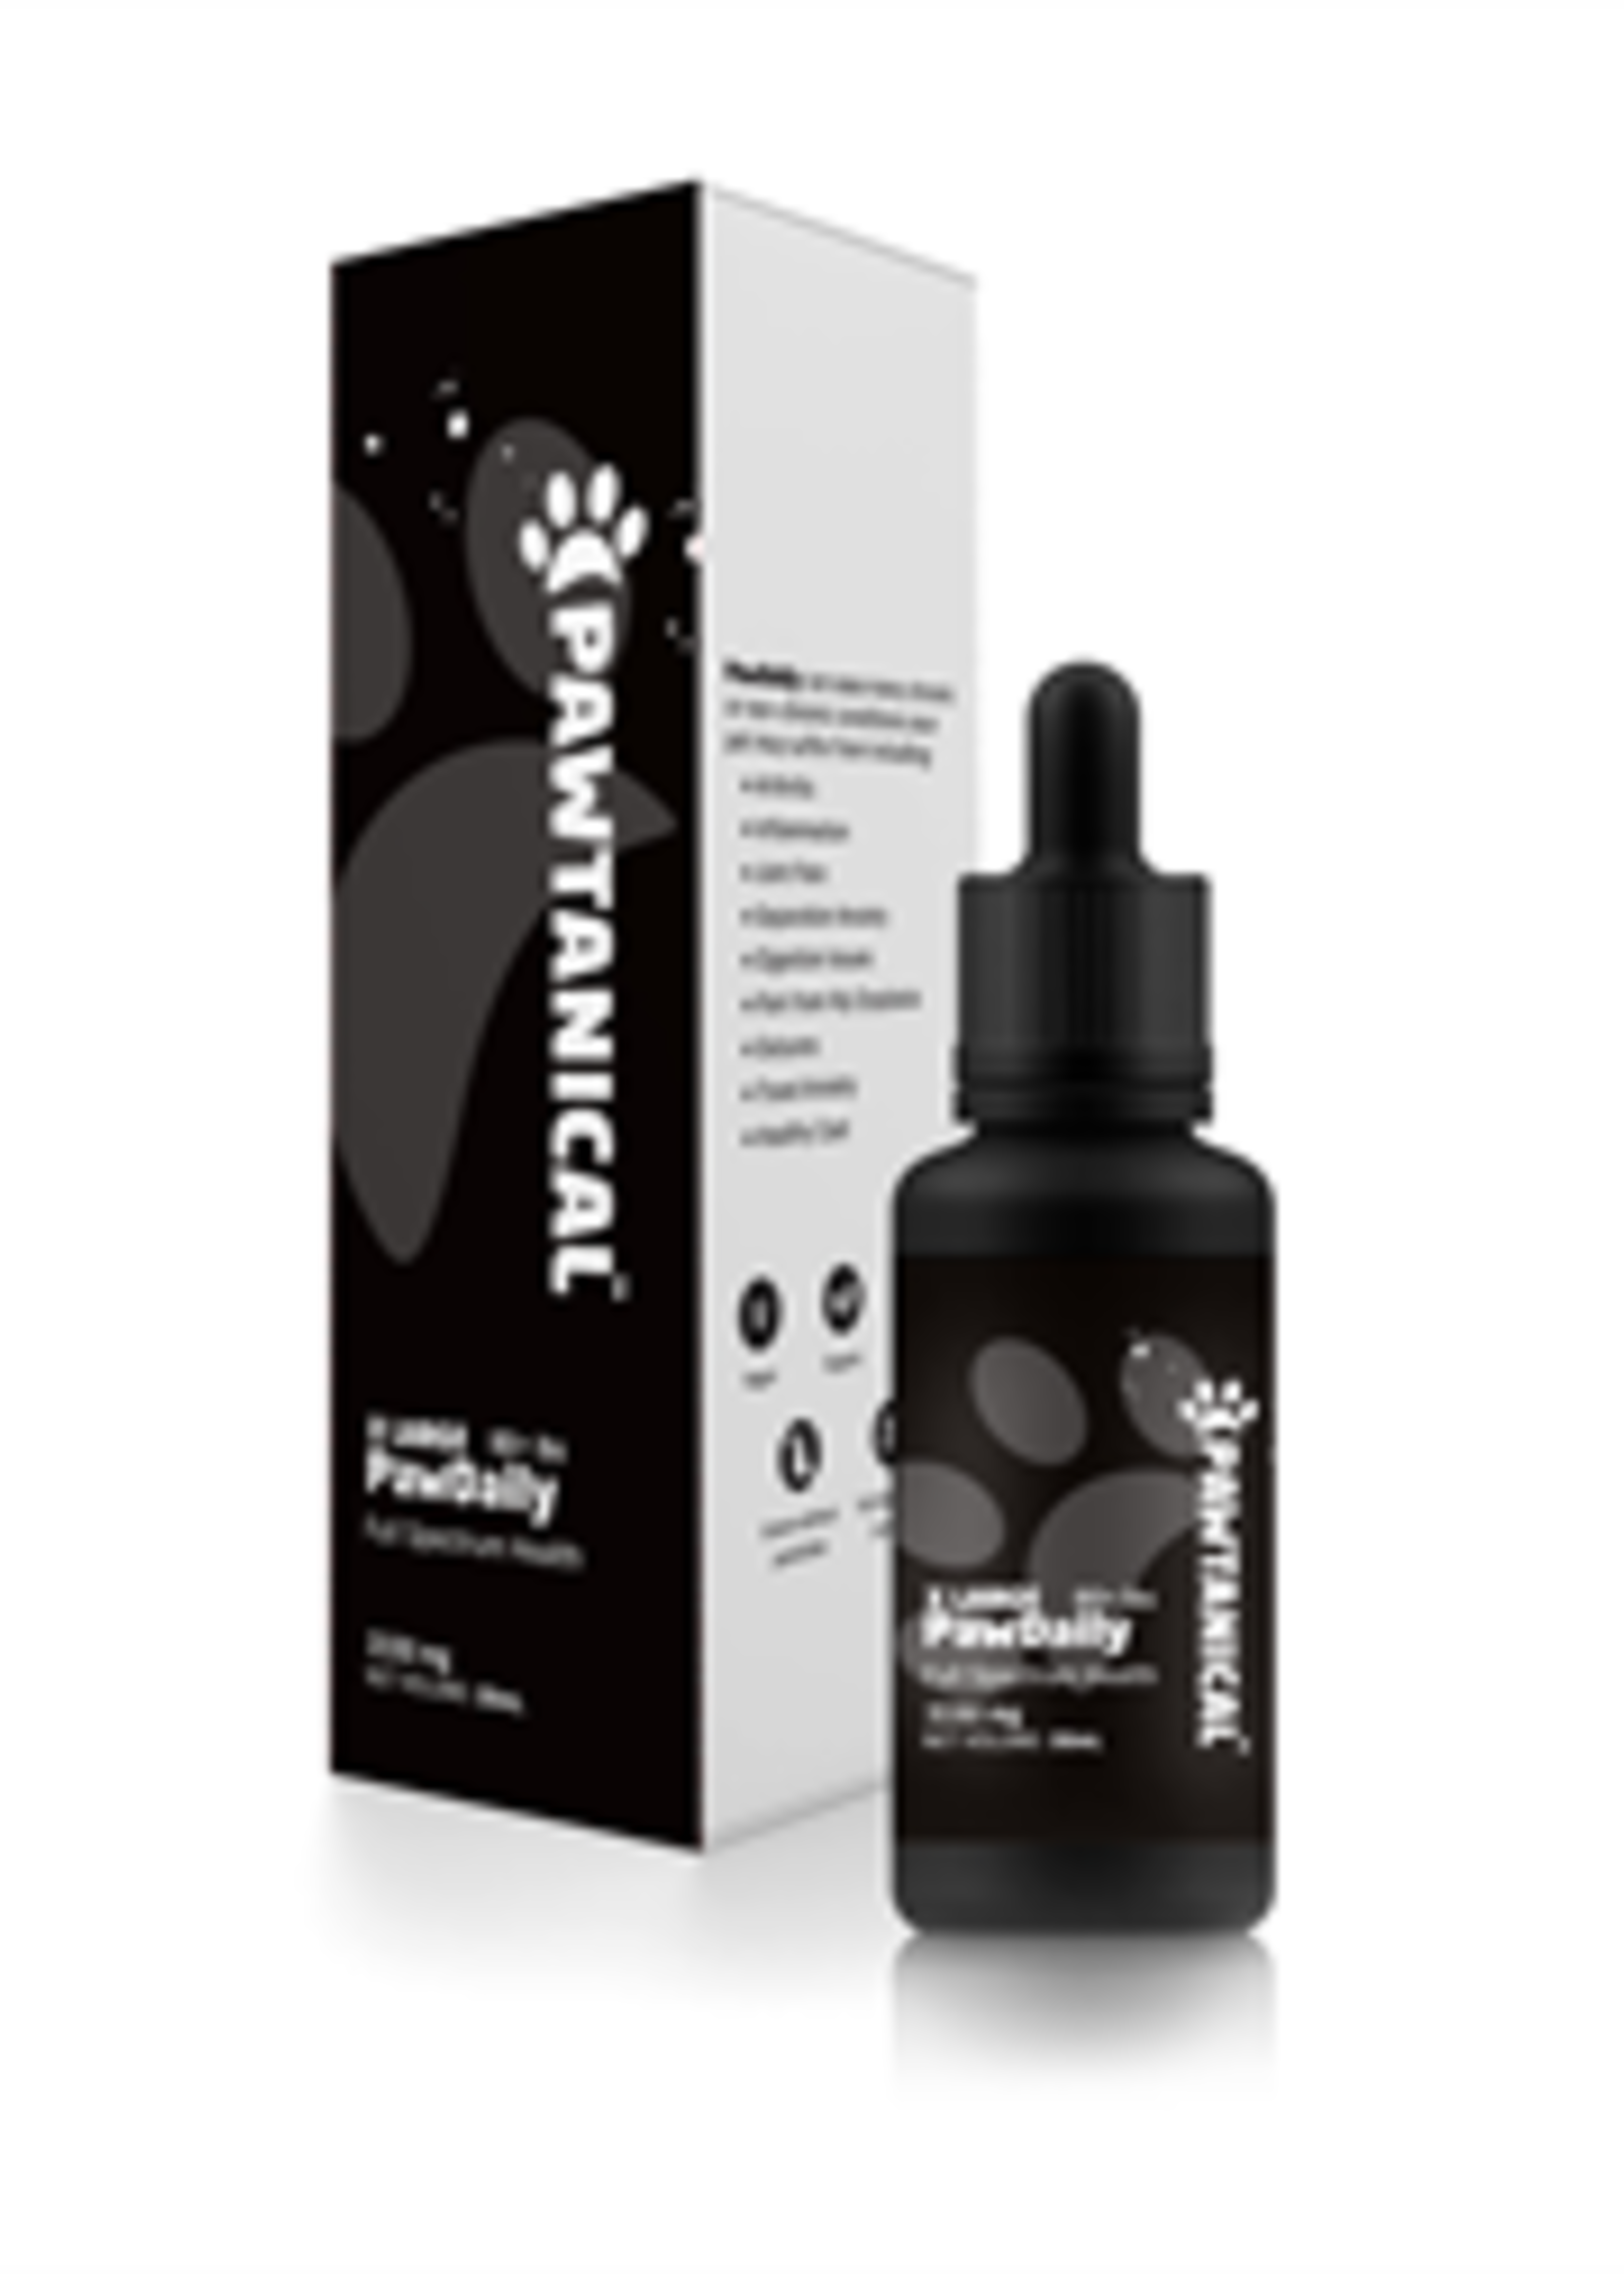 Pawtanicals Pawtanical PawDaily Full Spectrum Hemp Health Oil 3150mg - X-Large